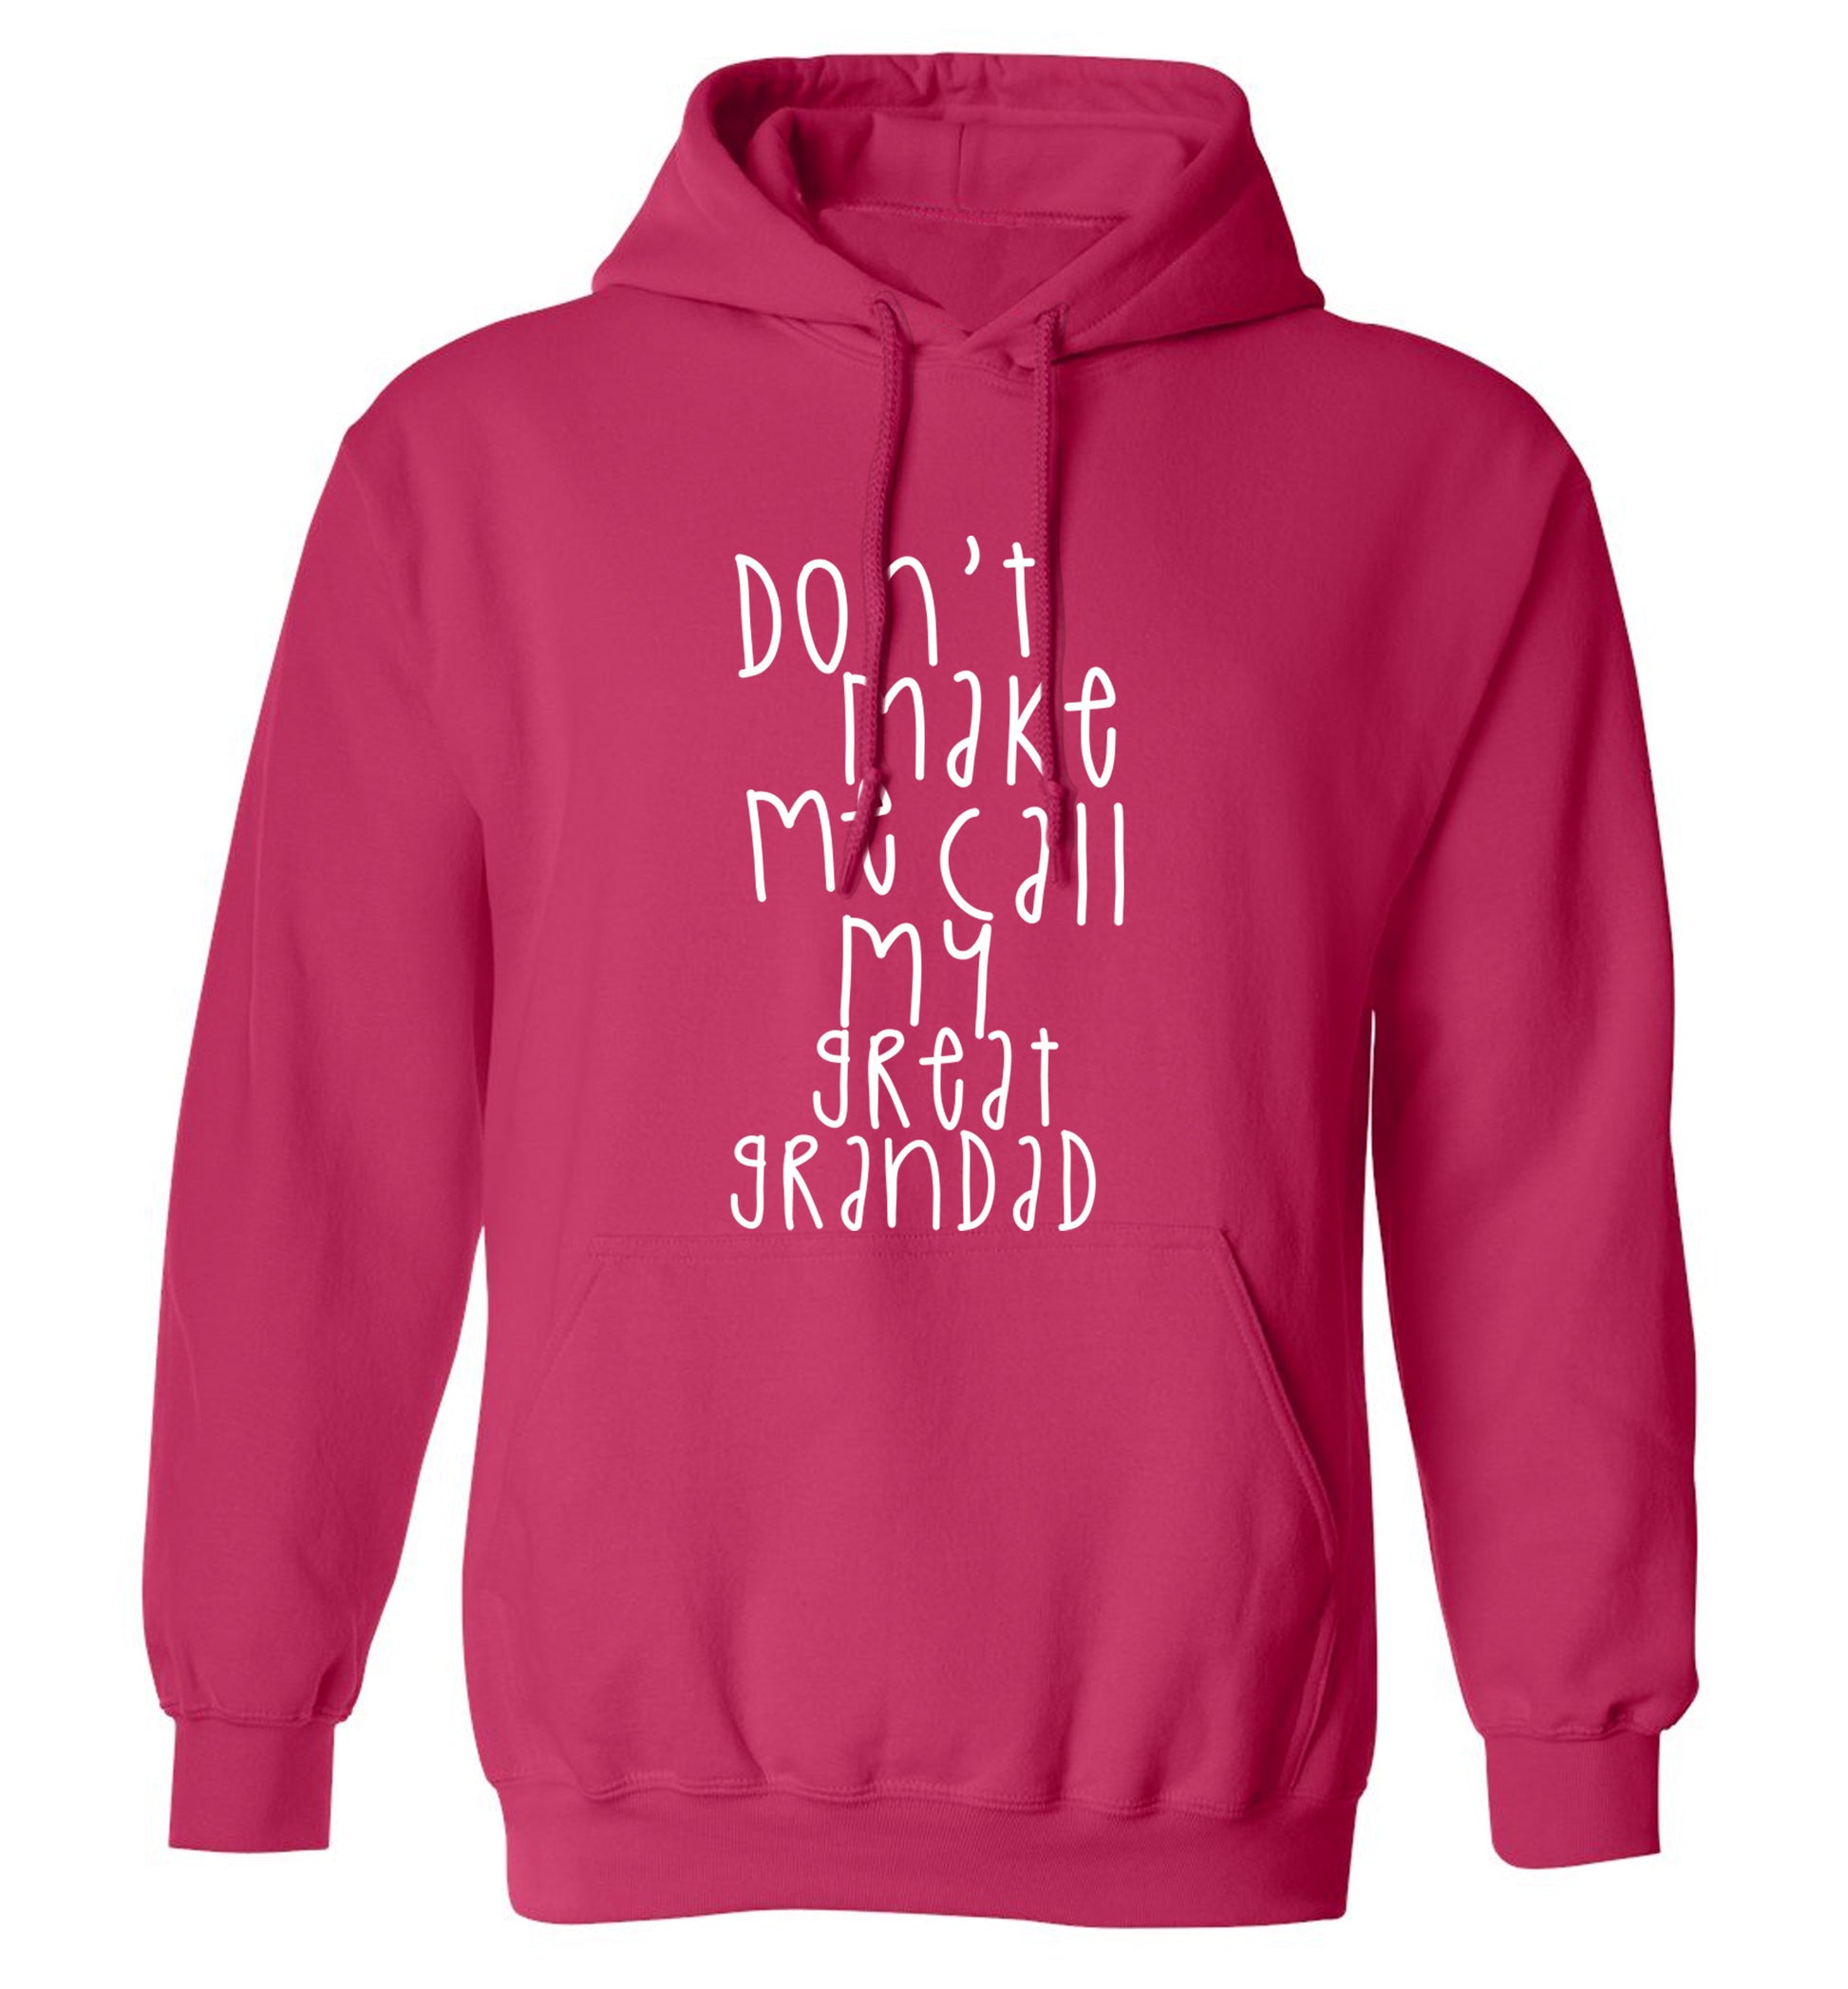 Don't make me call my great grandad adults unisex pink hoodie 2XL